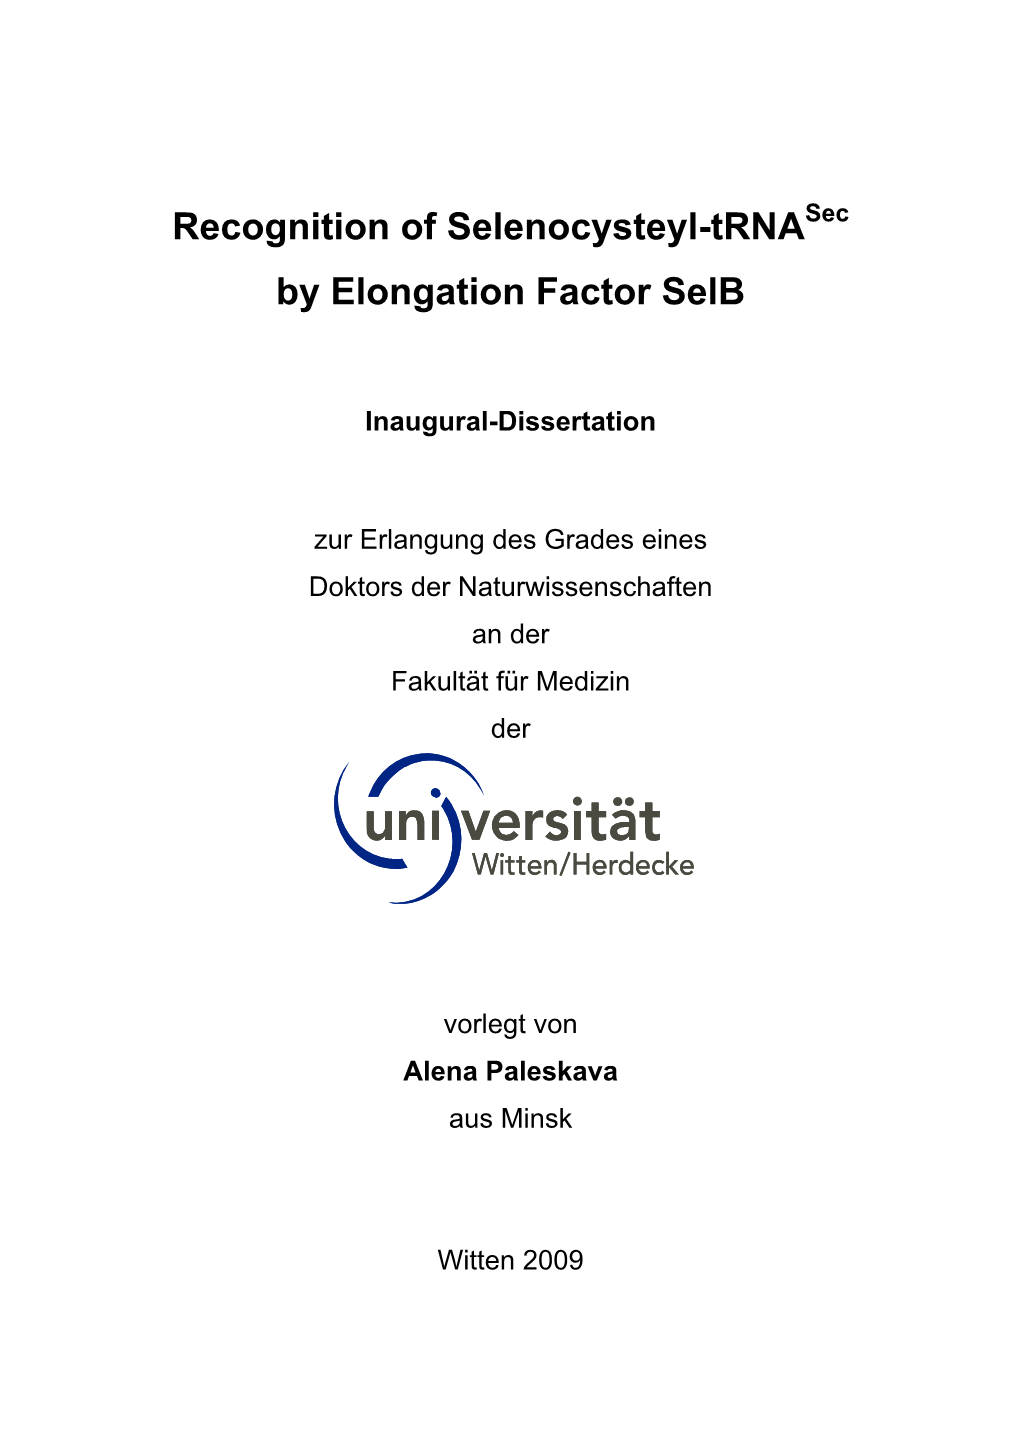 Recognition of Selenocysteyl-Trna by Elongation Factor Selb